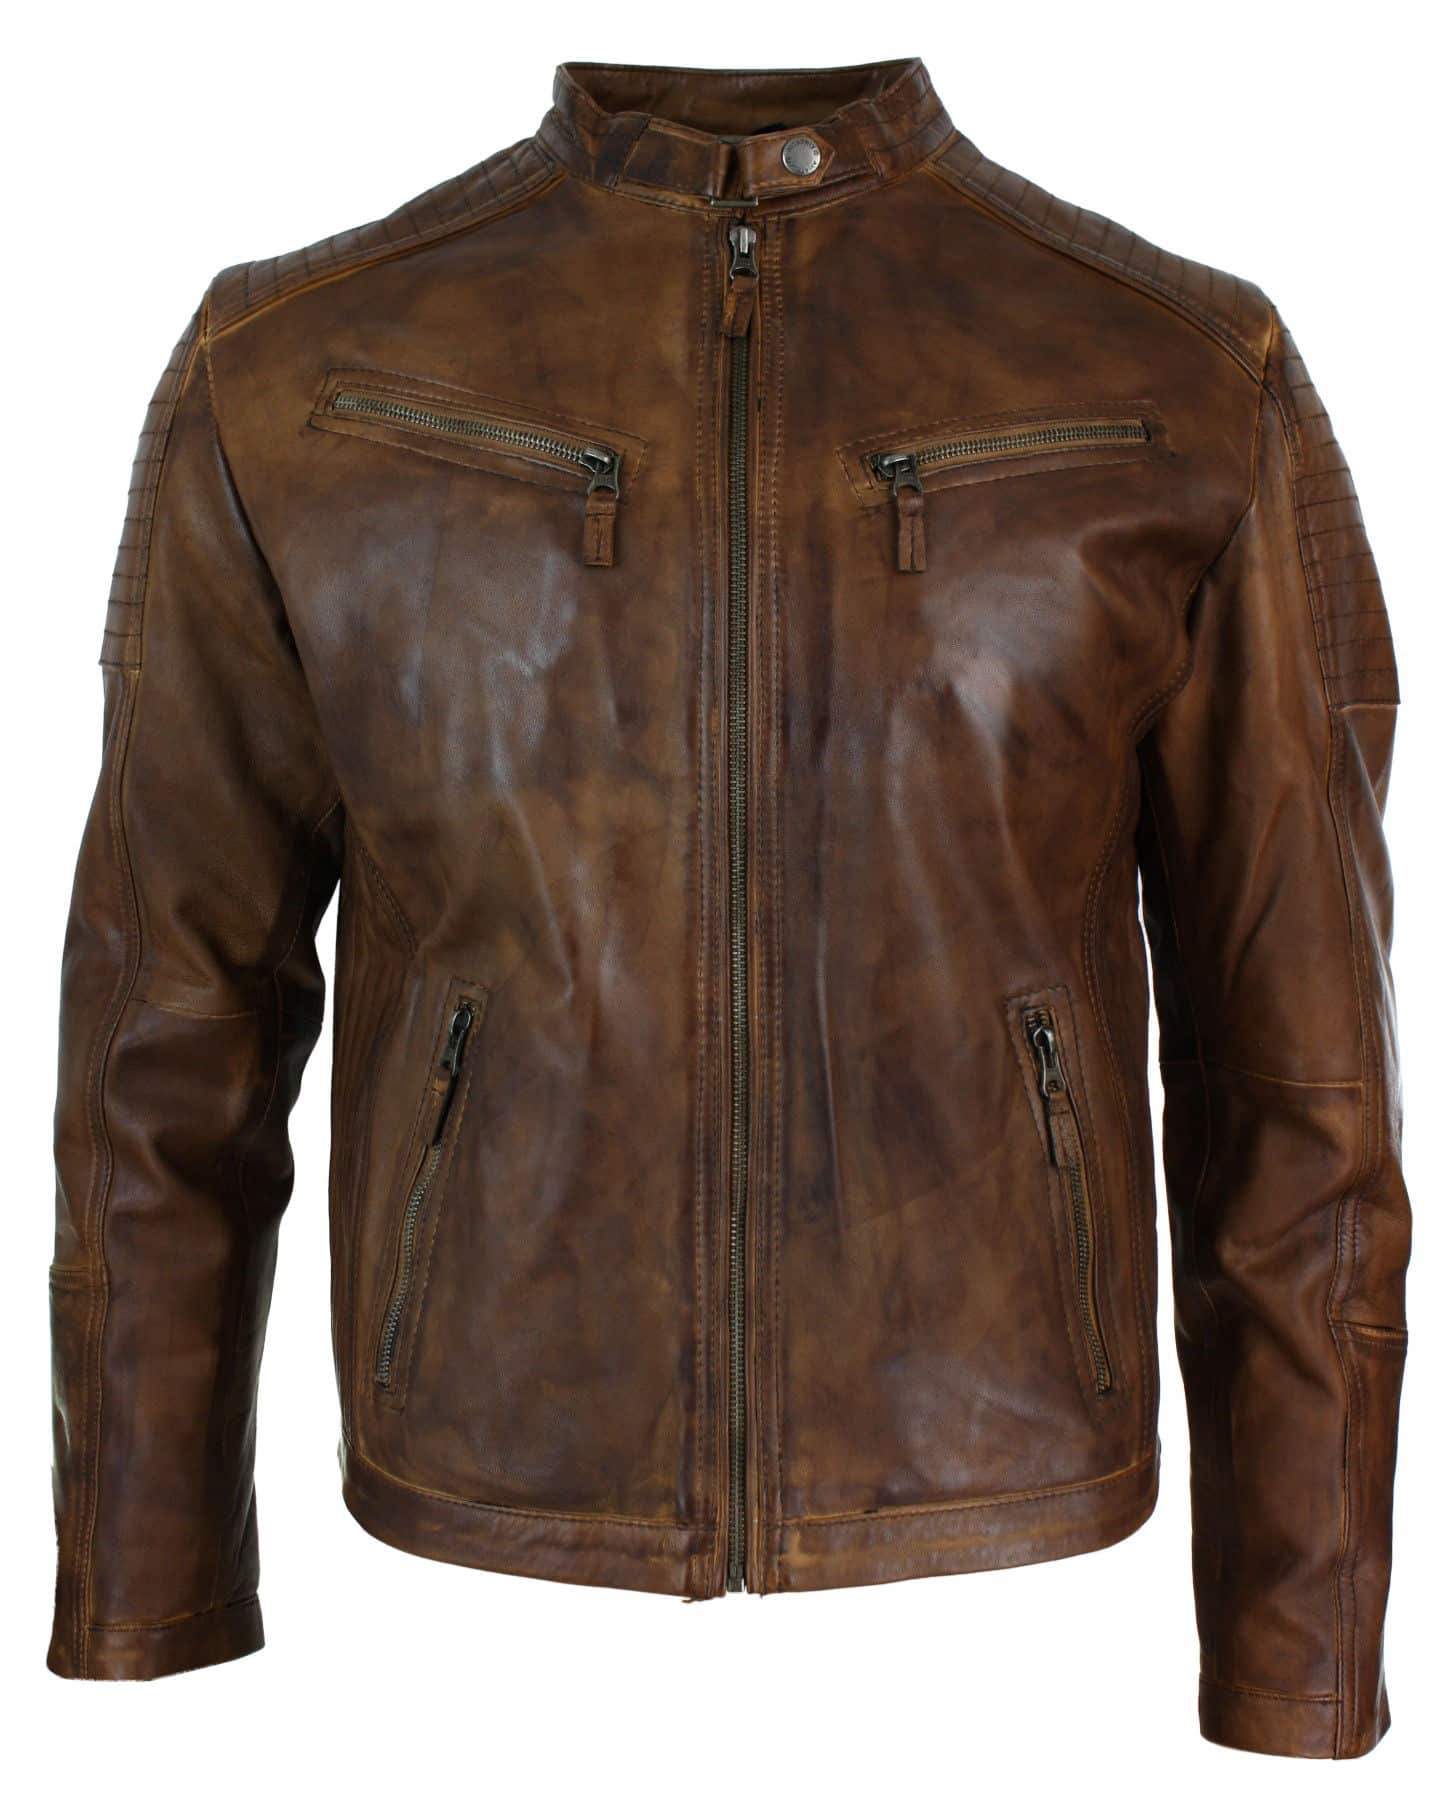 PeleCheCoco Leather Biker Jacket | Urban Outfitters – Covetboard